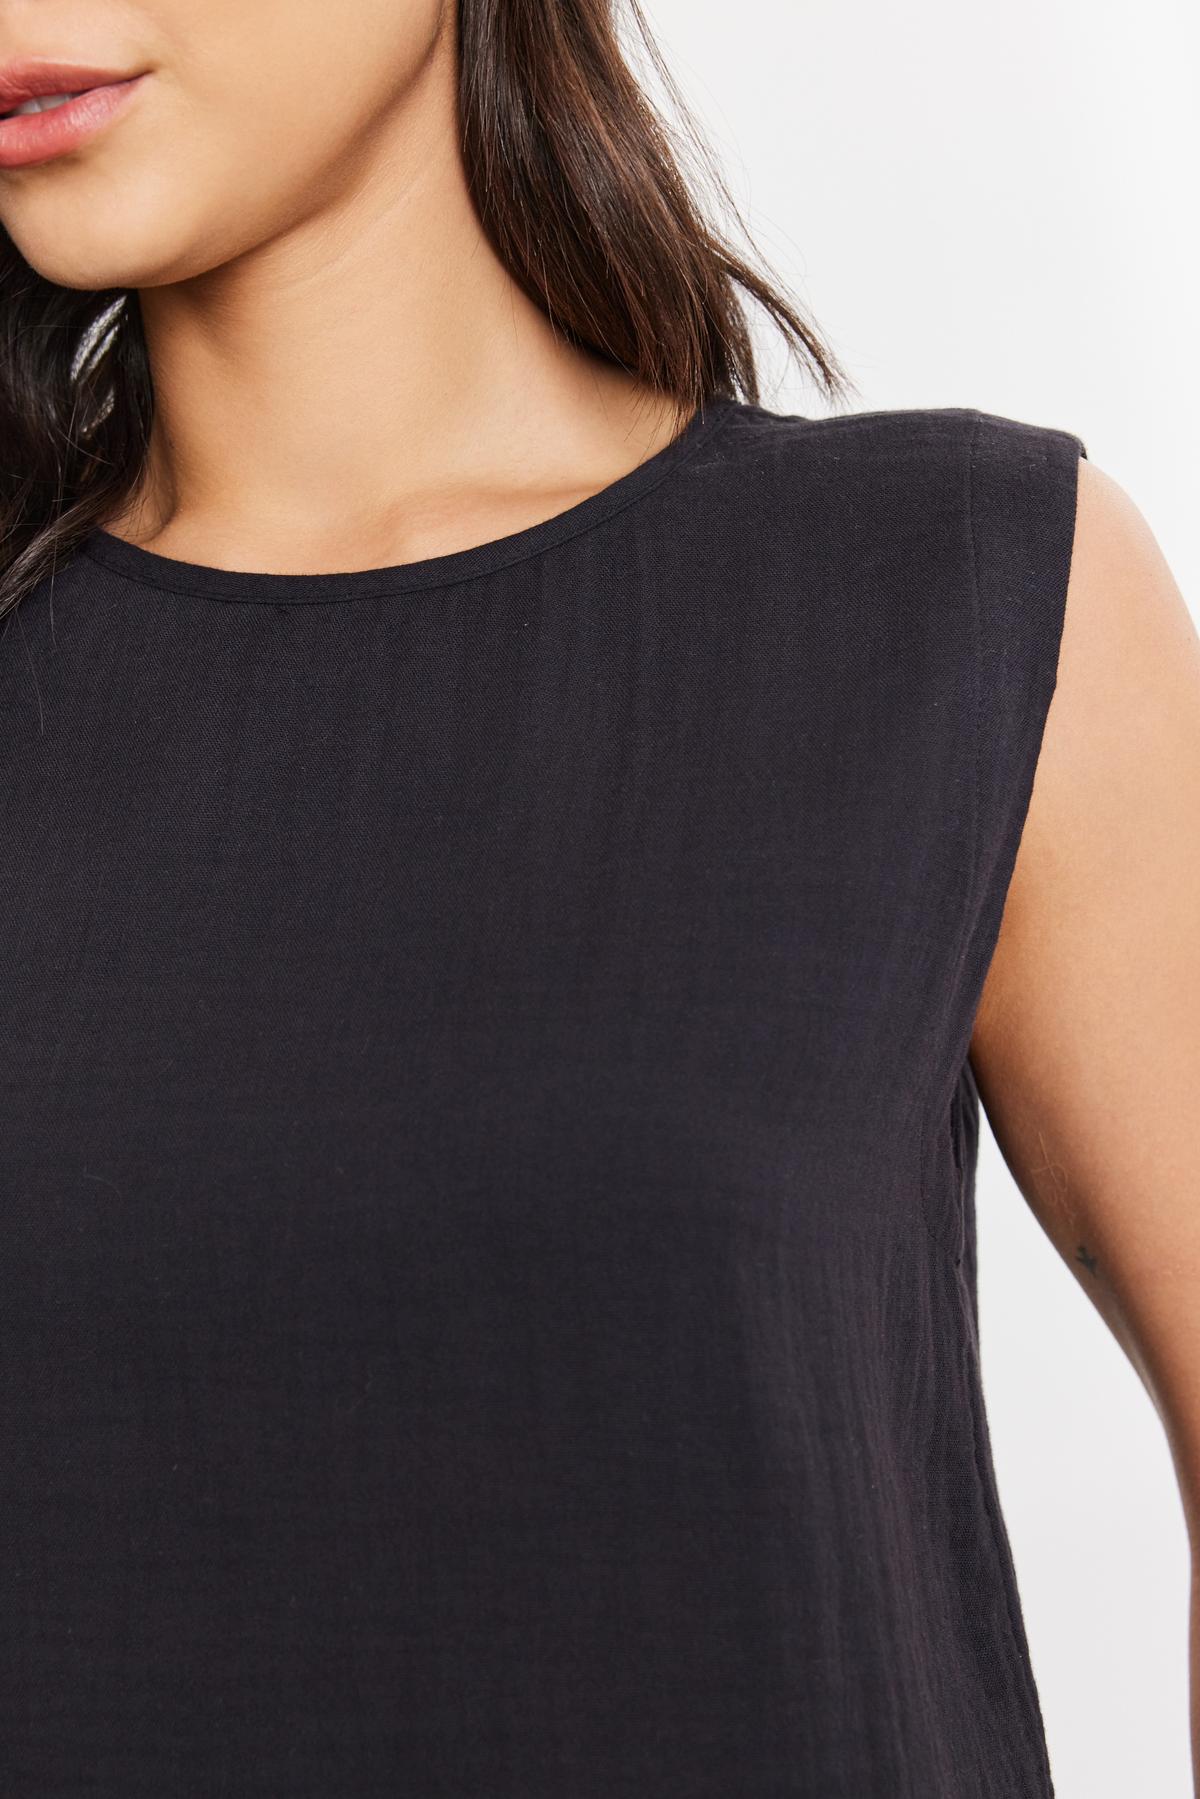 Close-up of a woman wearing a black Velvet by Graham & Spencer Aubren Cotton Gauze Tank Top, focusing on the shoulder and neckline area. Detail of fabric texture is visible.-36910090780865